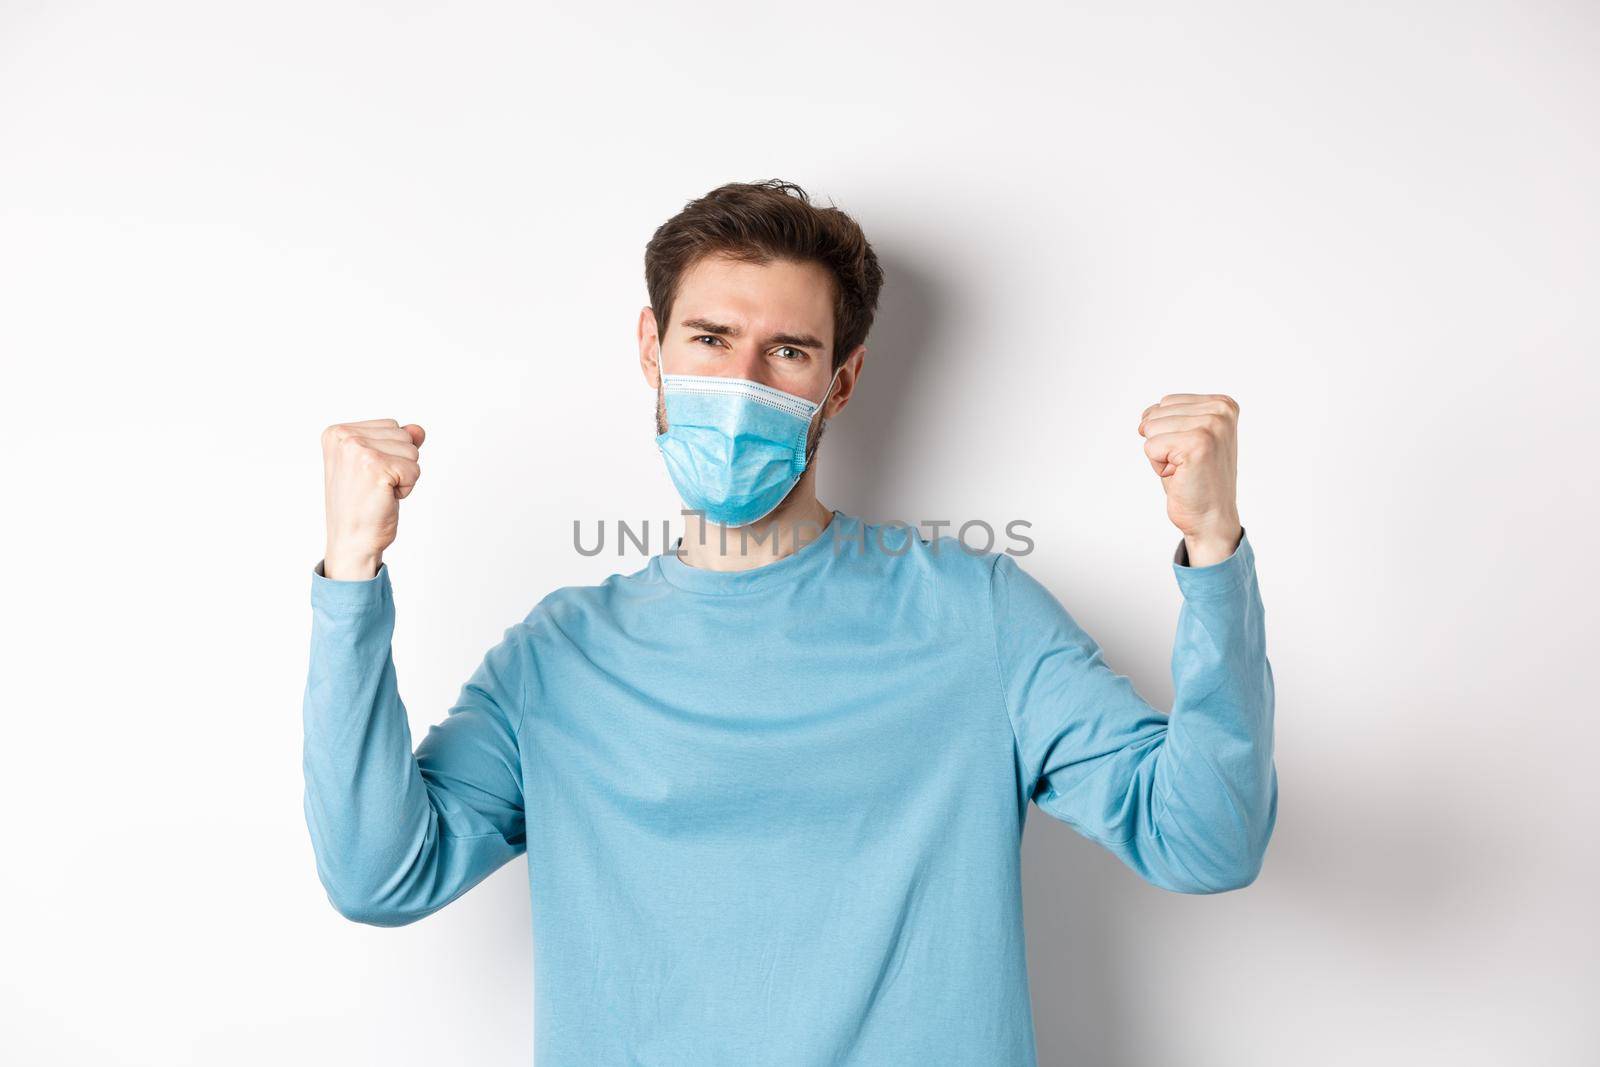 Covid-19, pandemic and social distancing concept. Happy young man in medical mask winning, screaming yes with satisfaction and raising hands up, celebrating victory, white background.